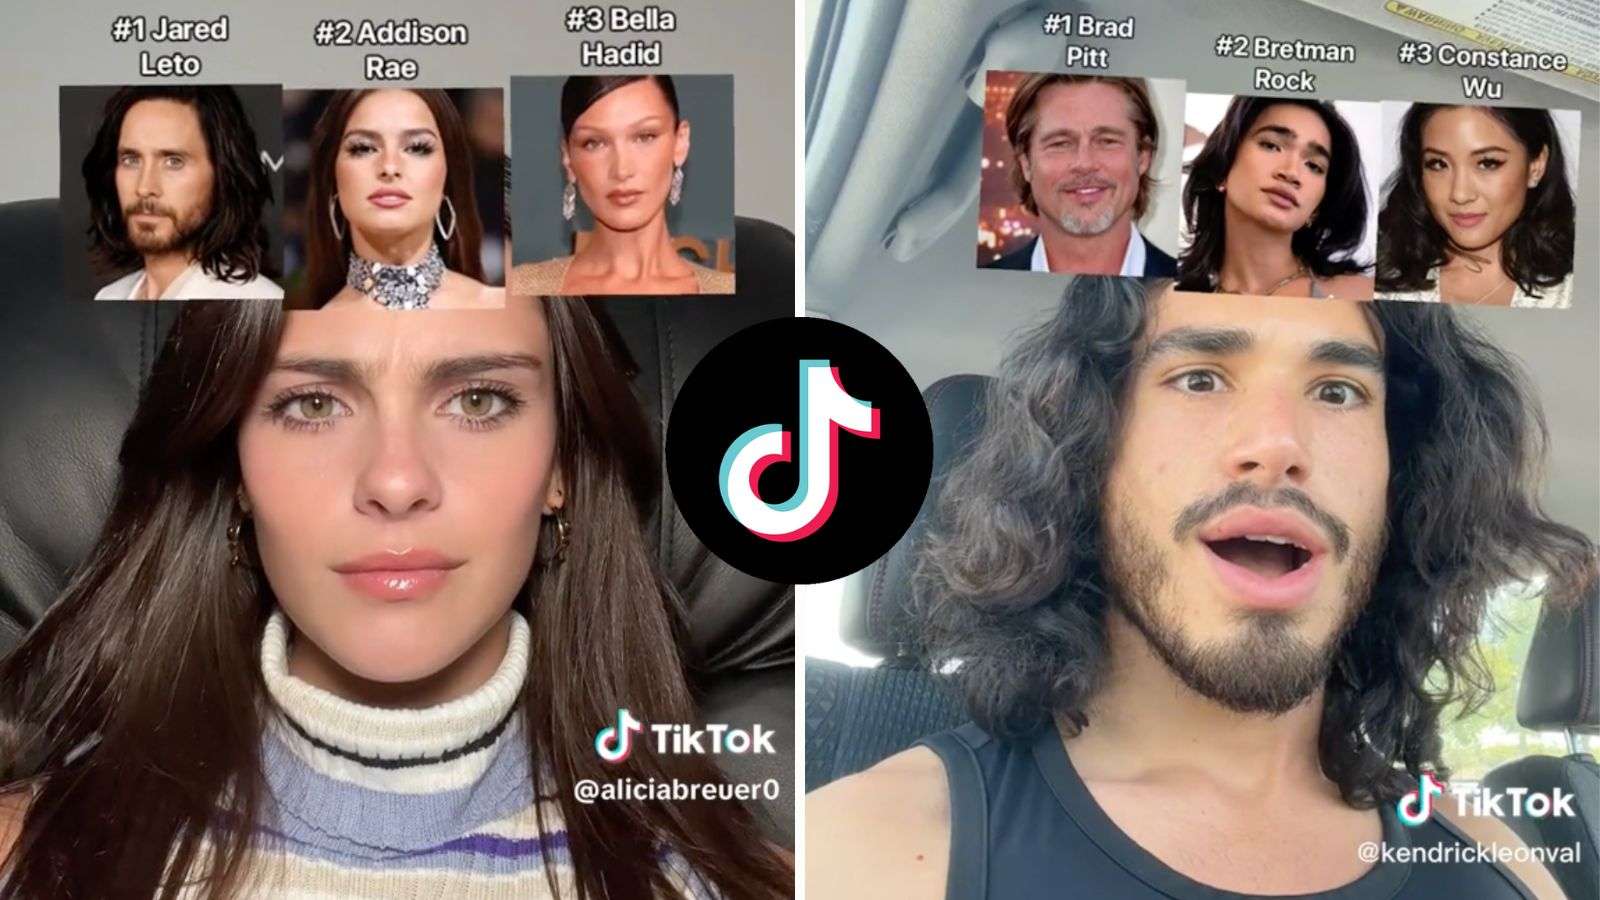 TikTok users trying out the celebrity lookalike filter